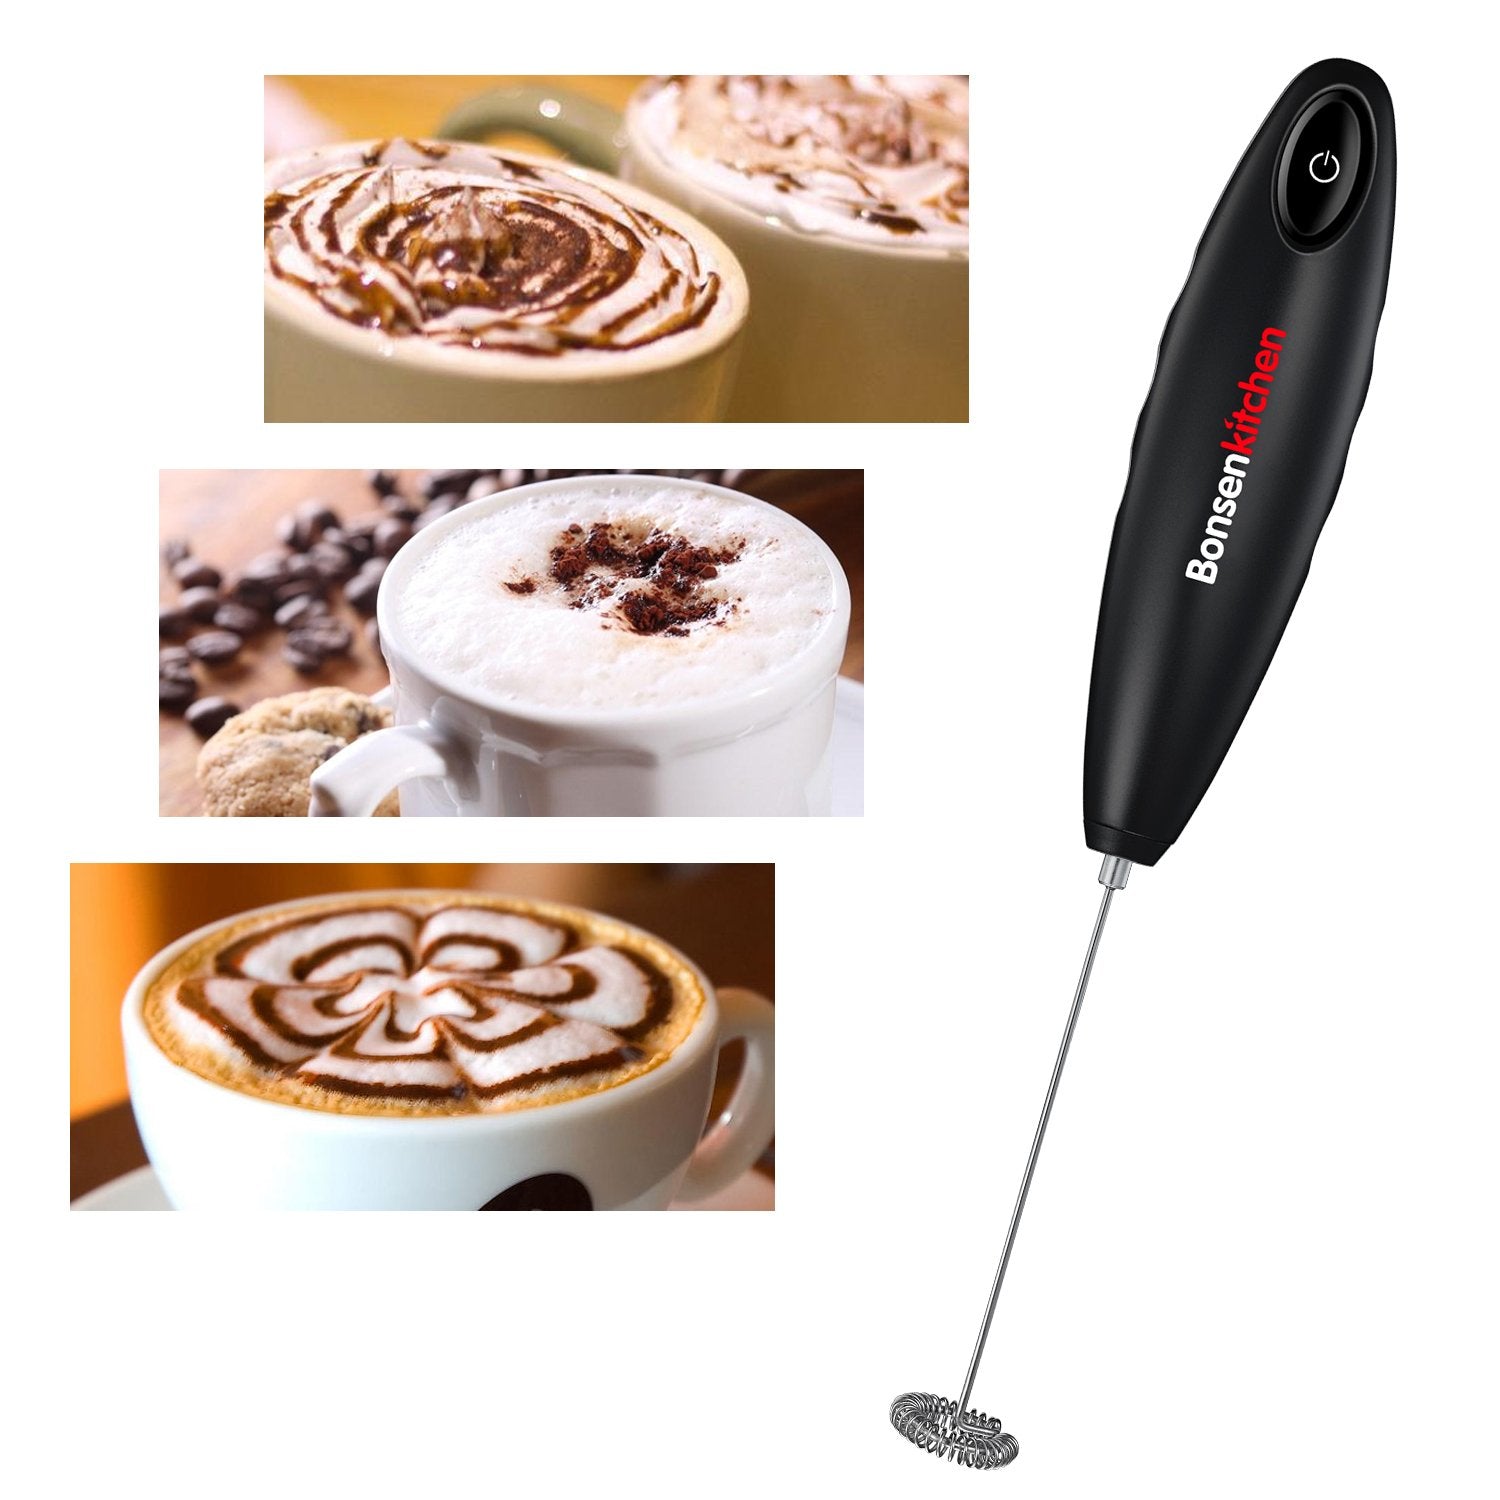 Handheld Milk Frother, Electric Hand Foamer Blender for Drink Mixer,  Perfect for Bulletproof coffee, Matcha, Hot Chocolate, Milk Whisk Frother 